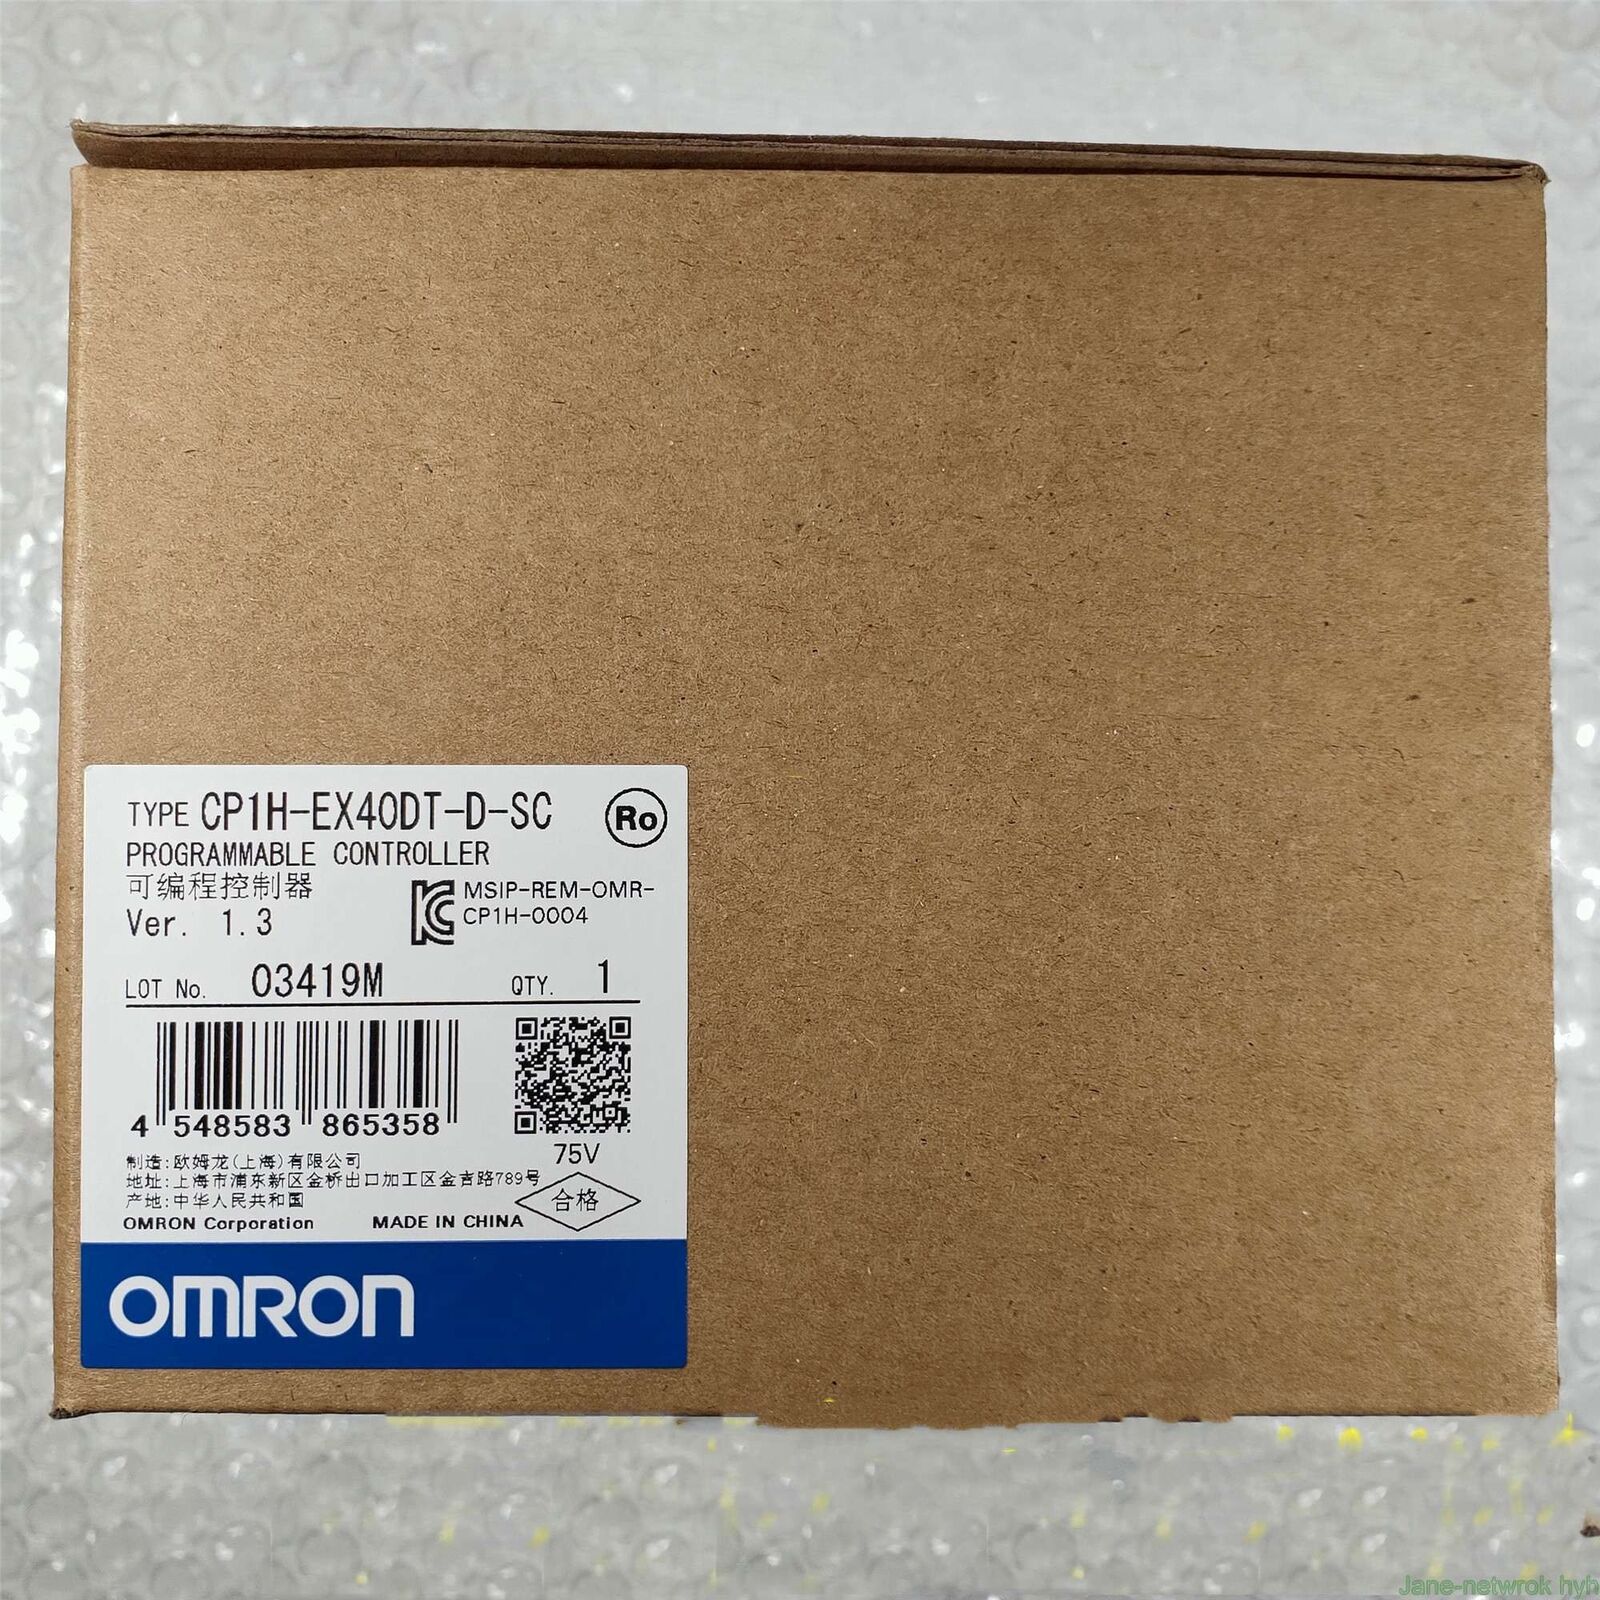 one new CP1H-EX40DT-D-SC Programmable Controller CP1HEX40DTDSC via DHL or Fedex